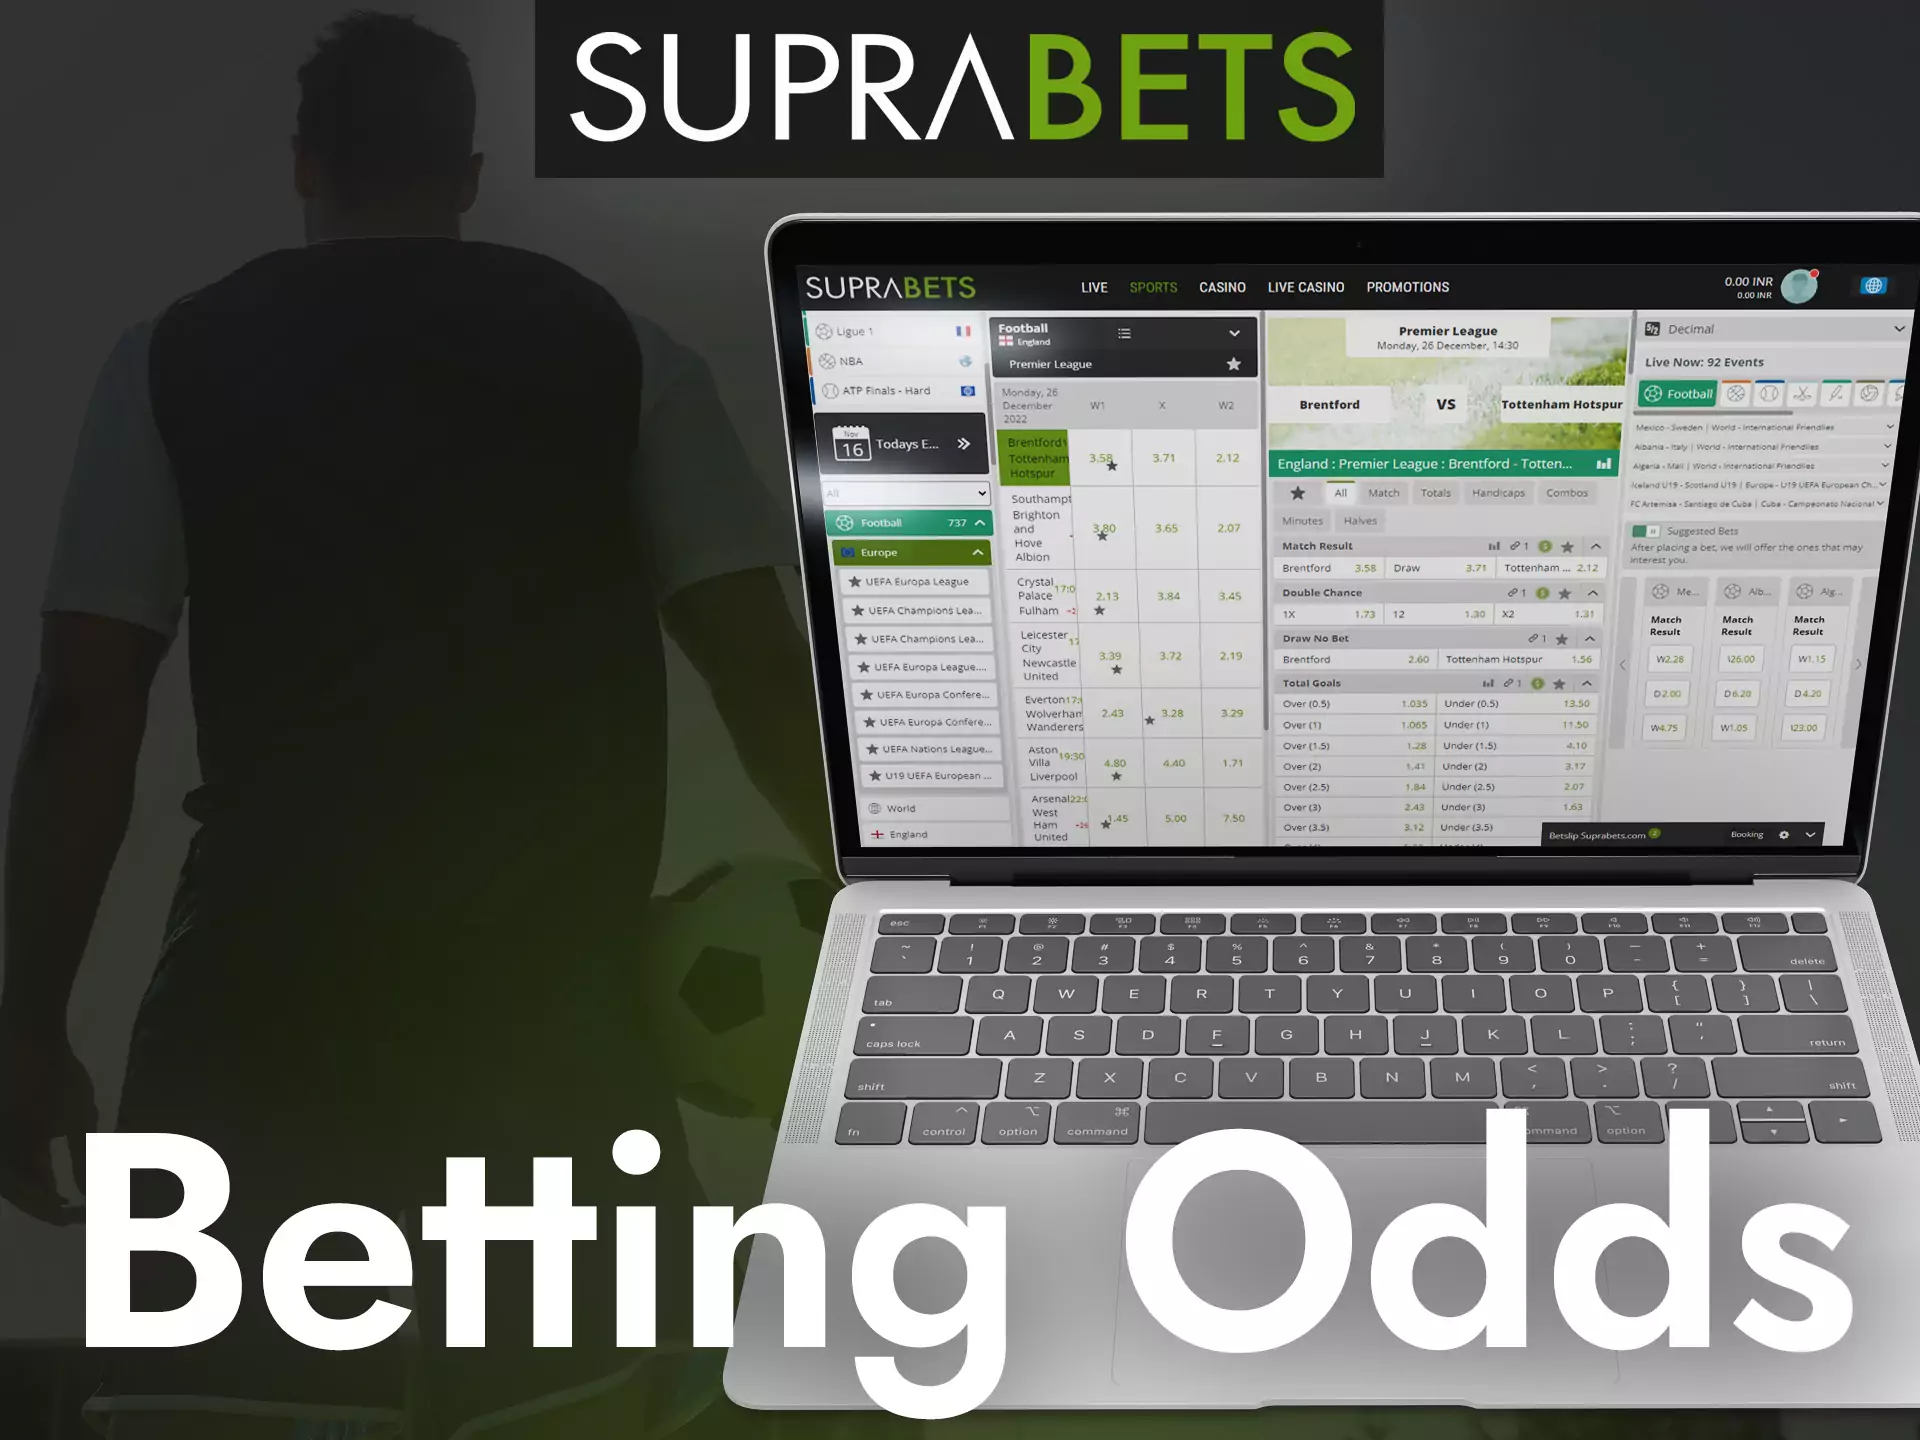 Suprabets offers special betting odds on any sporting event.